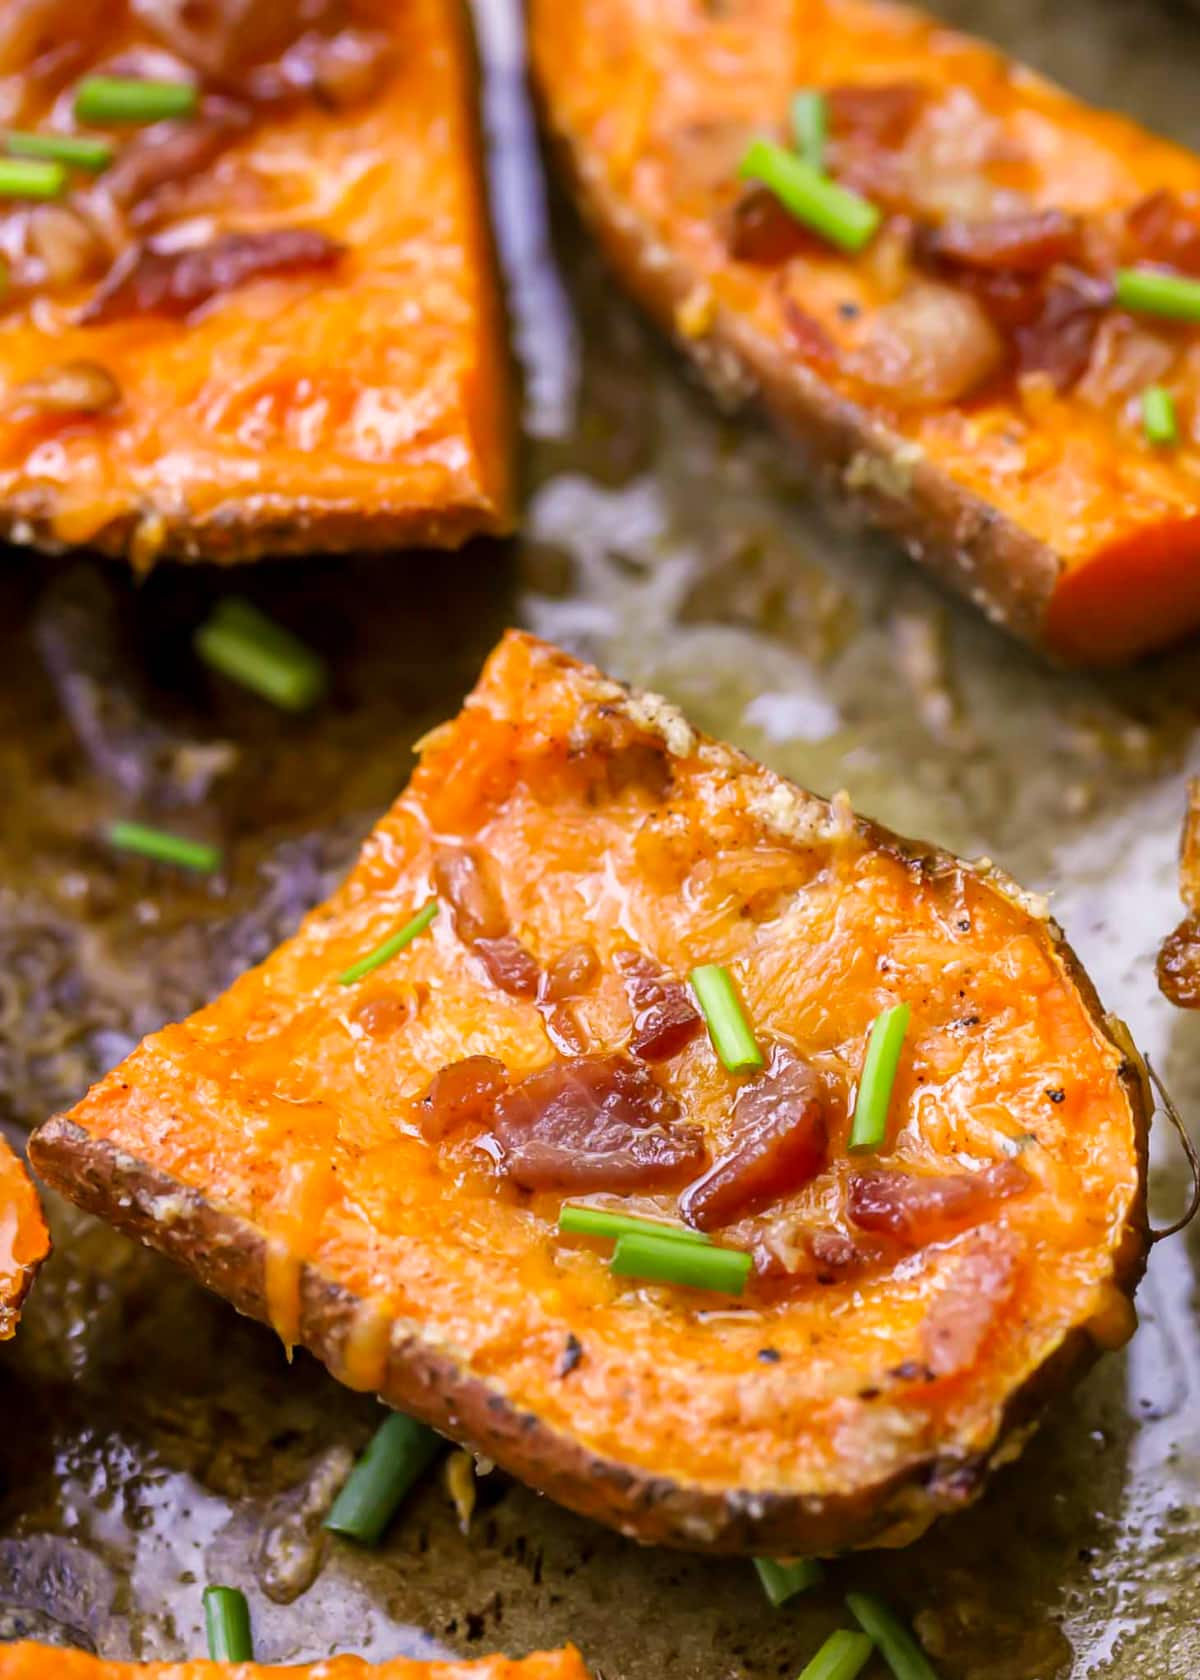 Sweet potato skins recipe with bacon and chives.